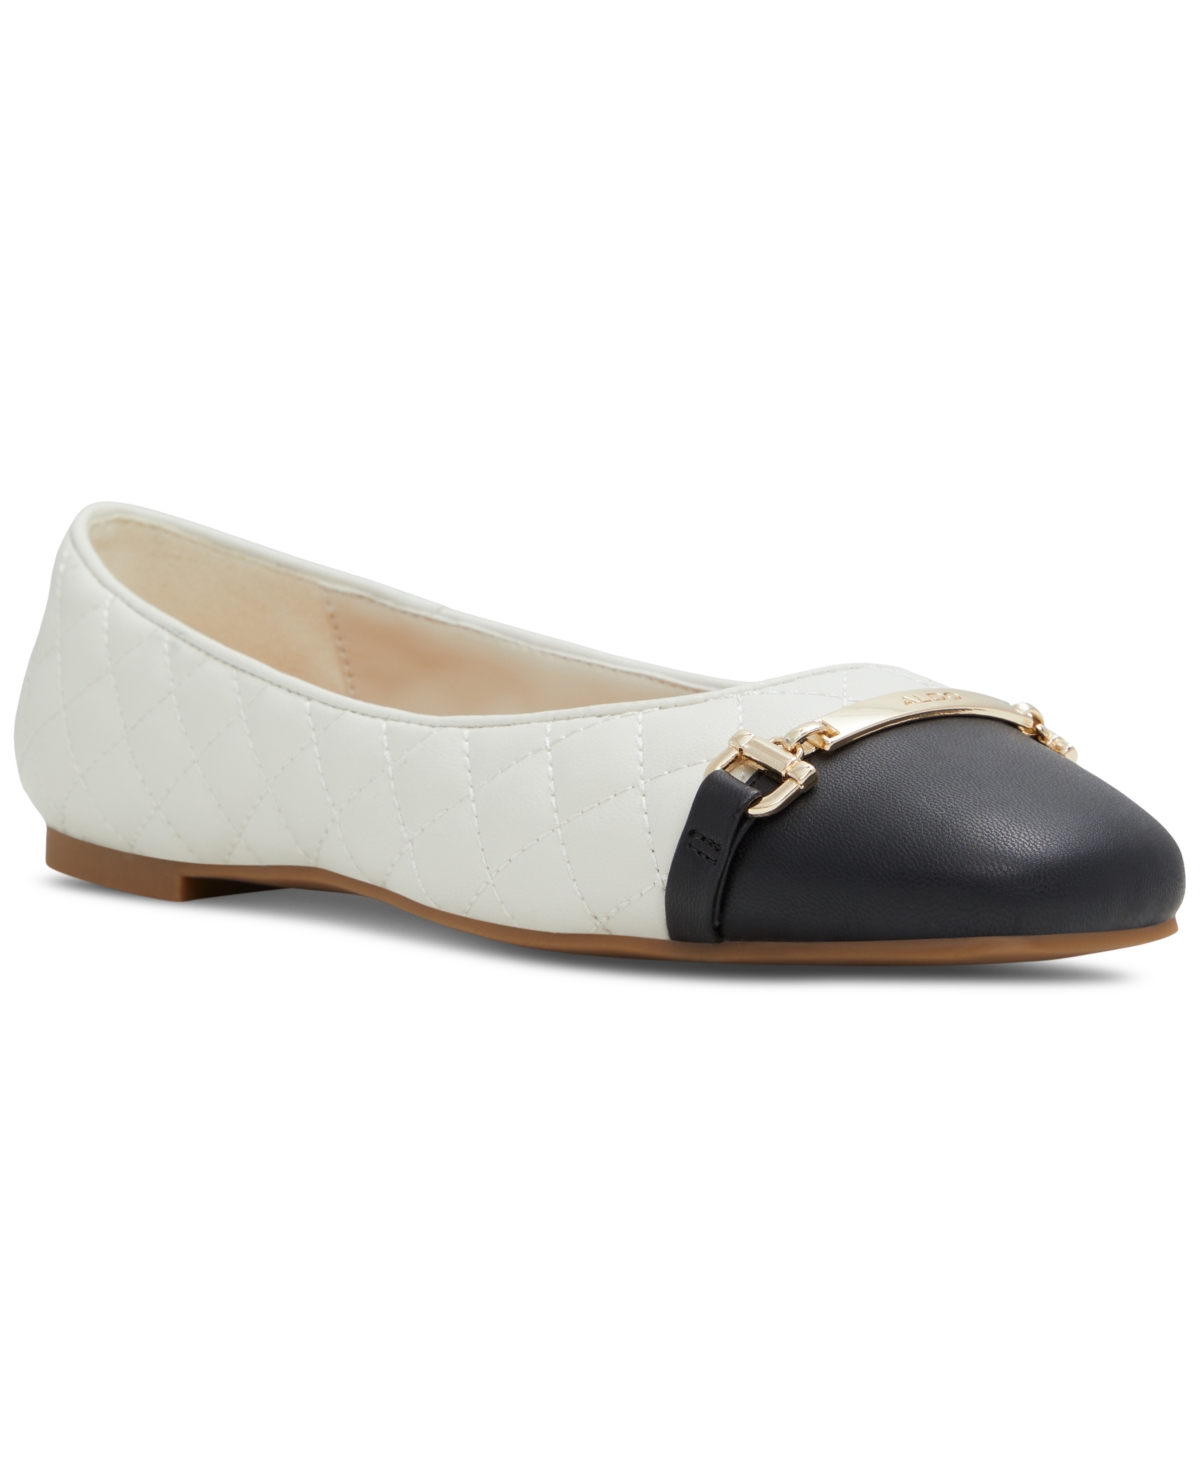 Women's Leanne Quilted Hardware Slip-On Ballerina Flats - White/Black Quilted